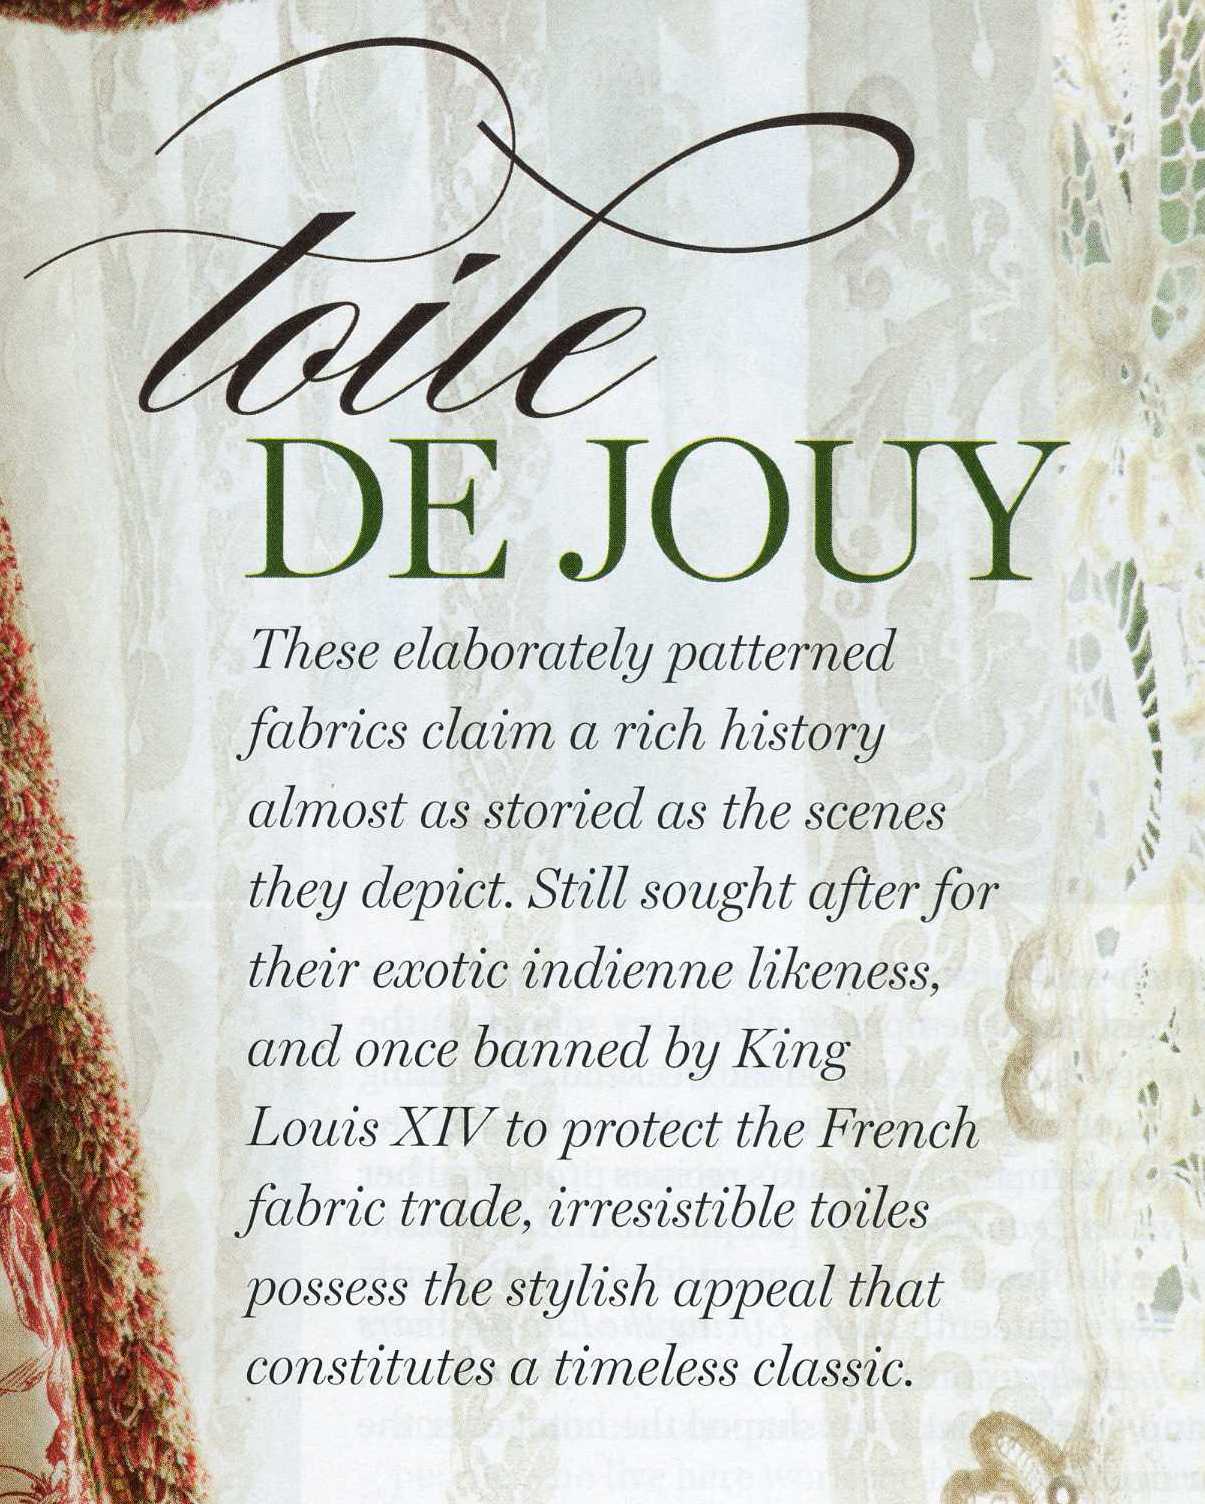 The Storied History of Toile de Jouy Fabric